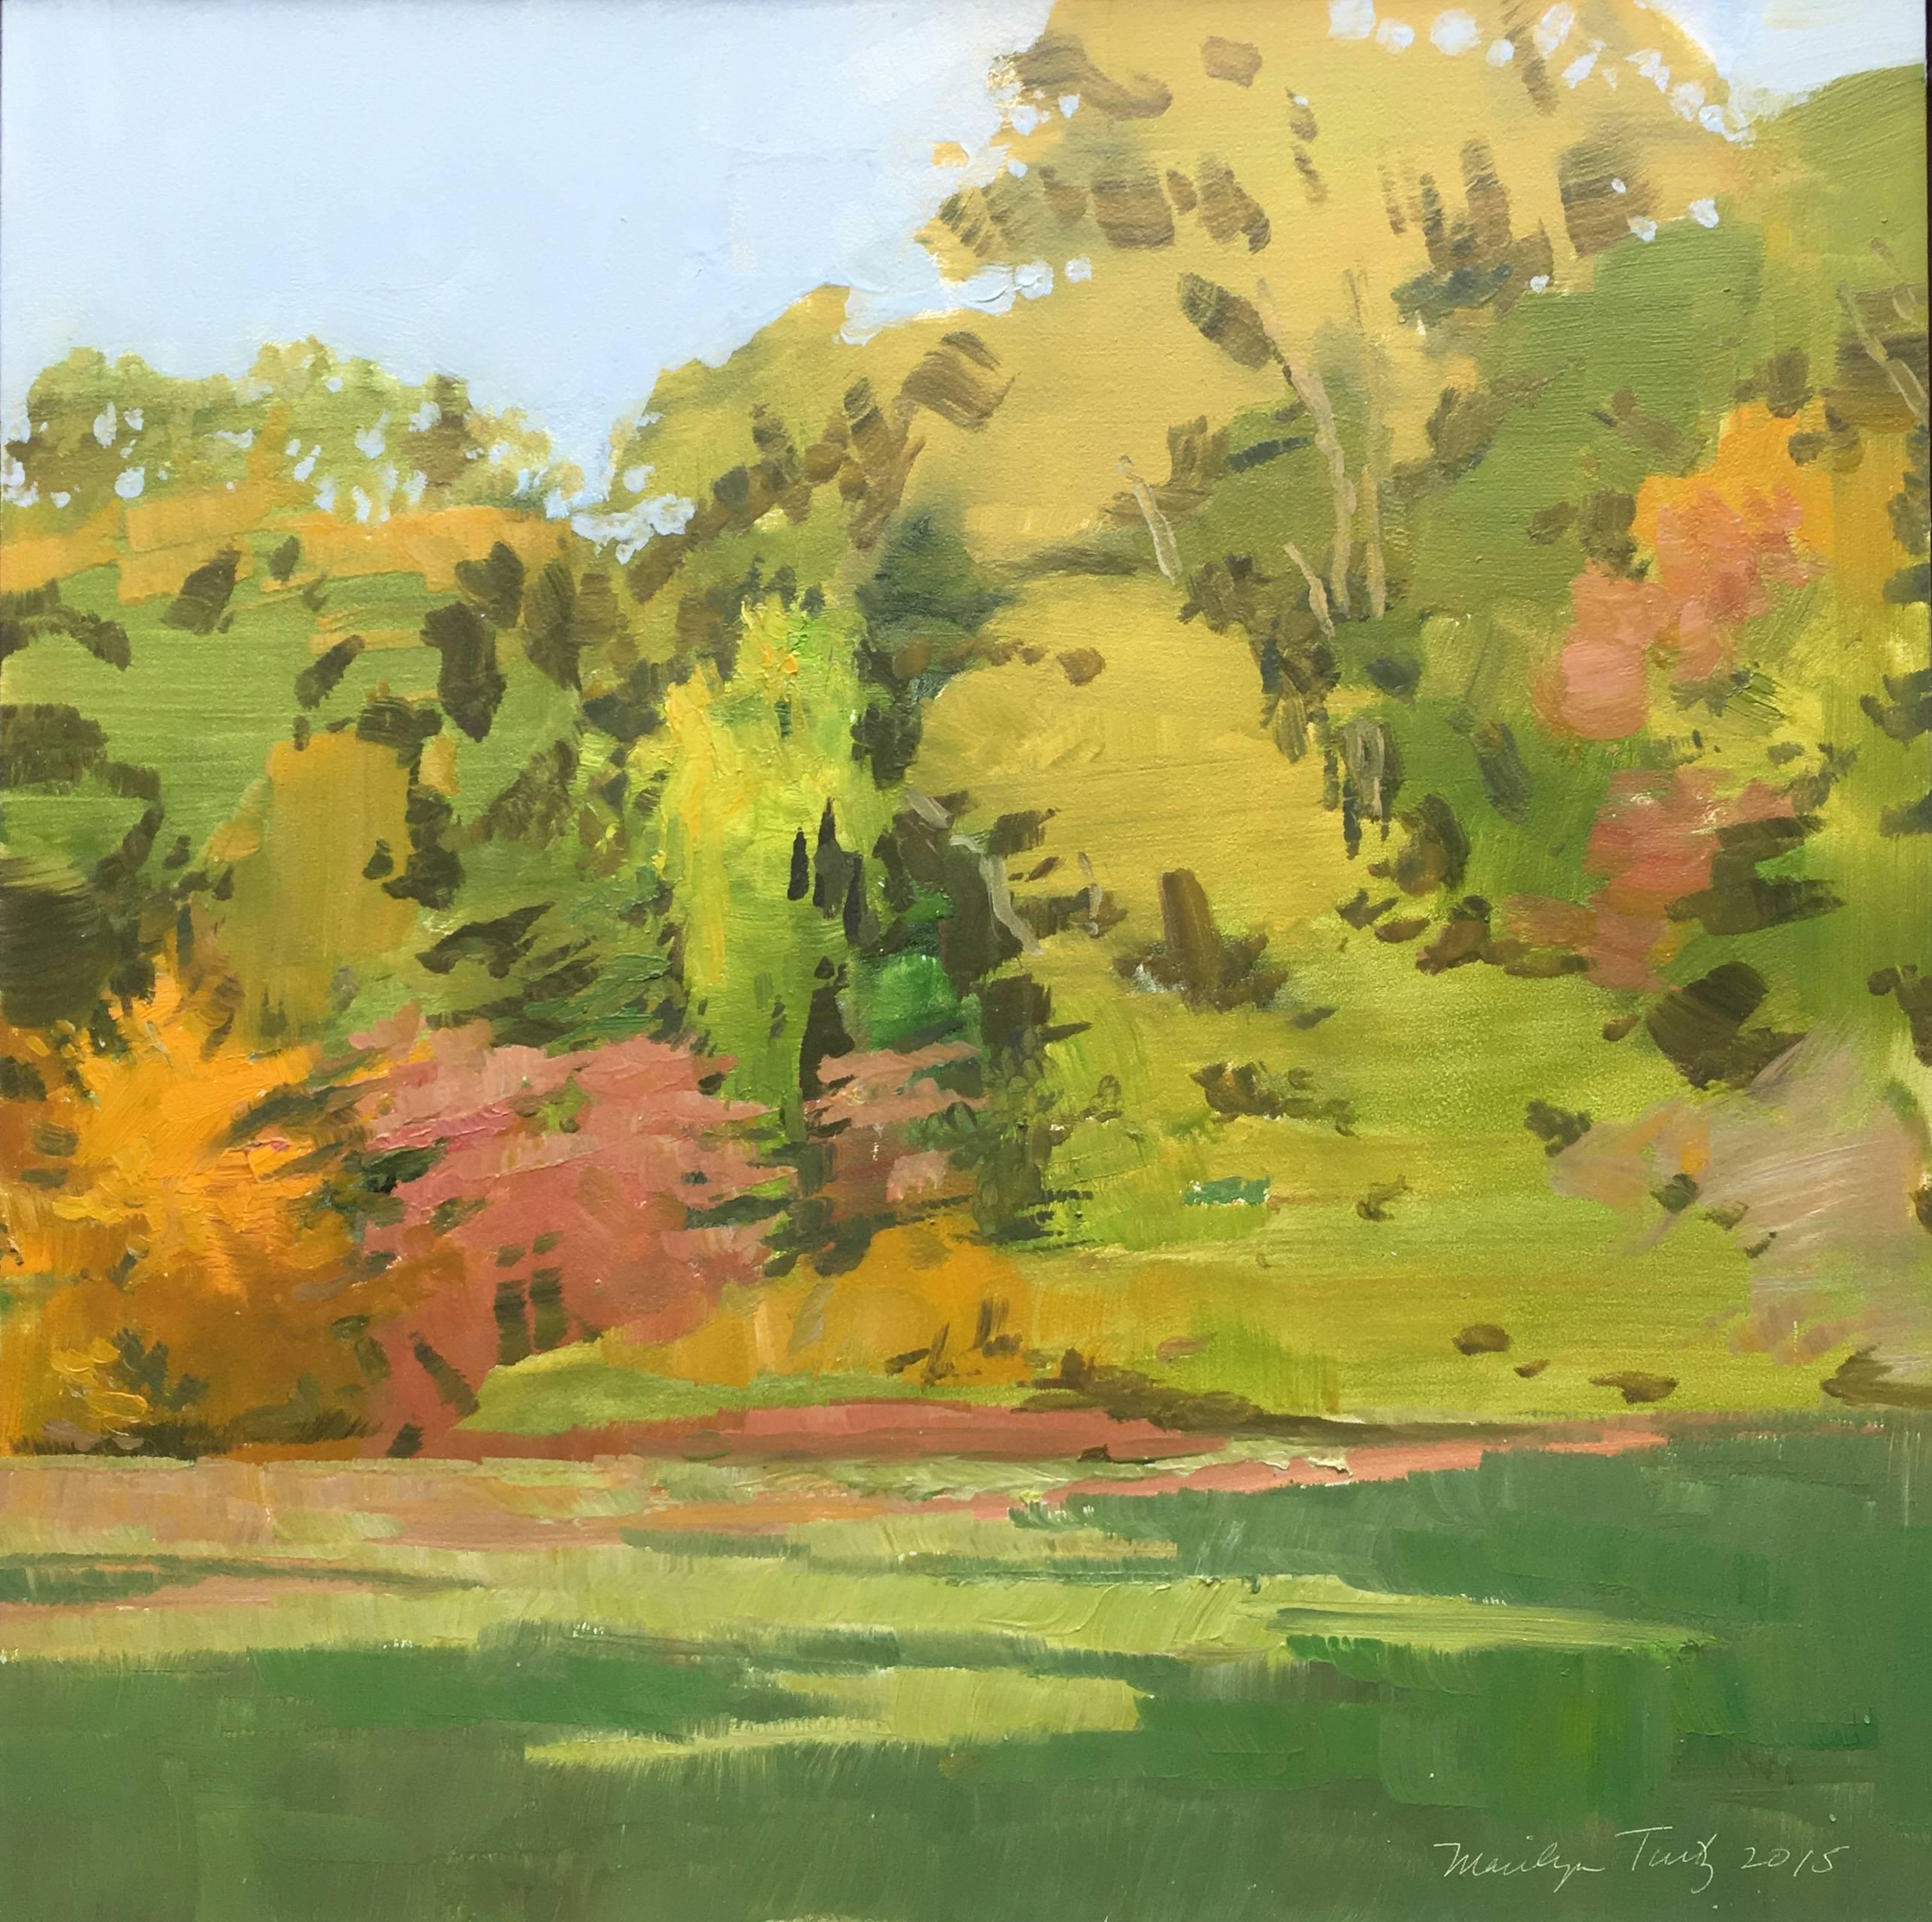 MARILYN TURTZ breathes new life into the Impressionism, using oil paint as a means through which to elide time and space. Working en plein aire, Turtz’s need for concision has become a defining characteristic of her work. The simplicity with which